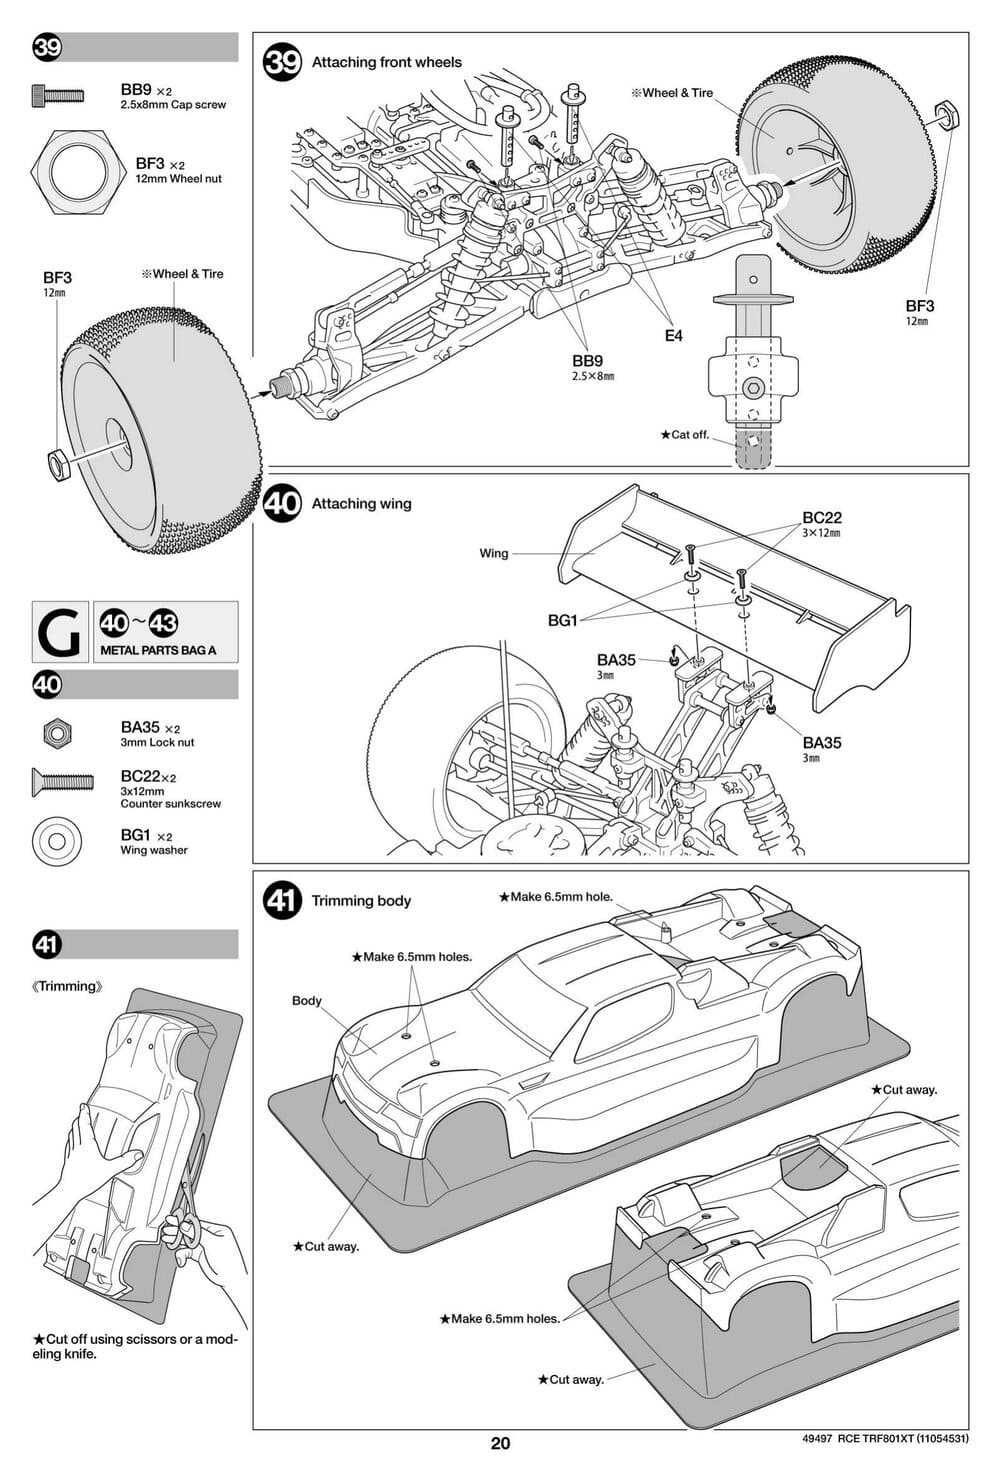 Tamiya - TRF801Xt Performance Package Version Chassis - Manual - Page 20